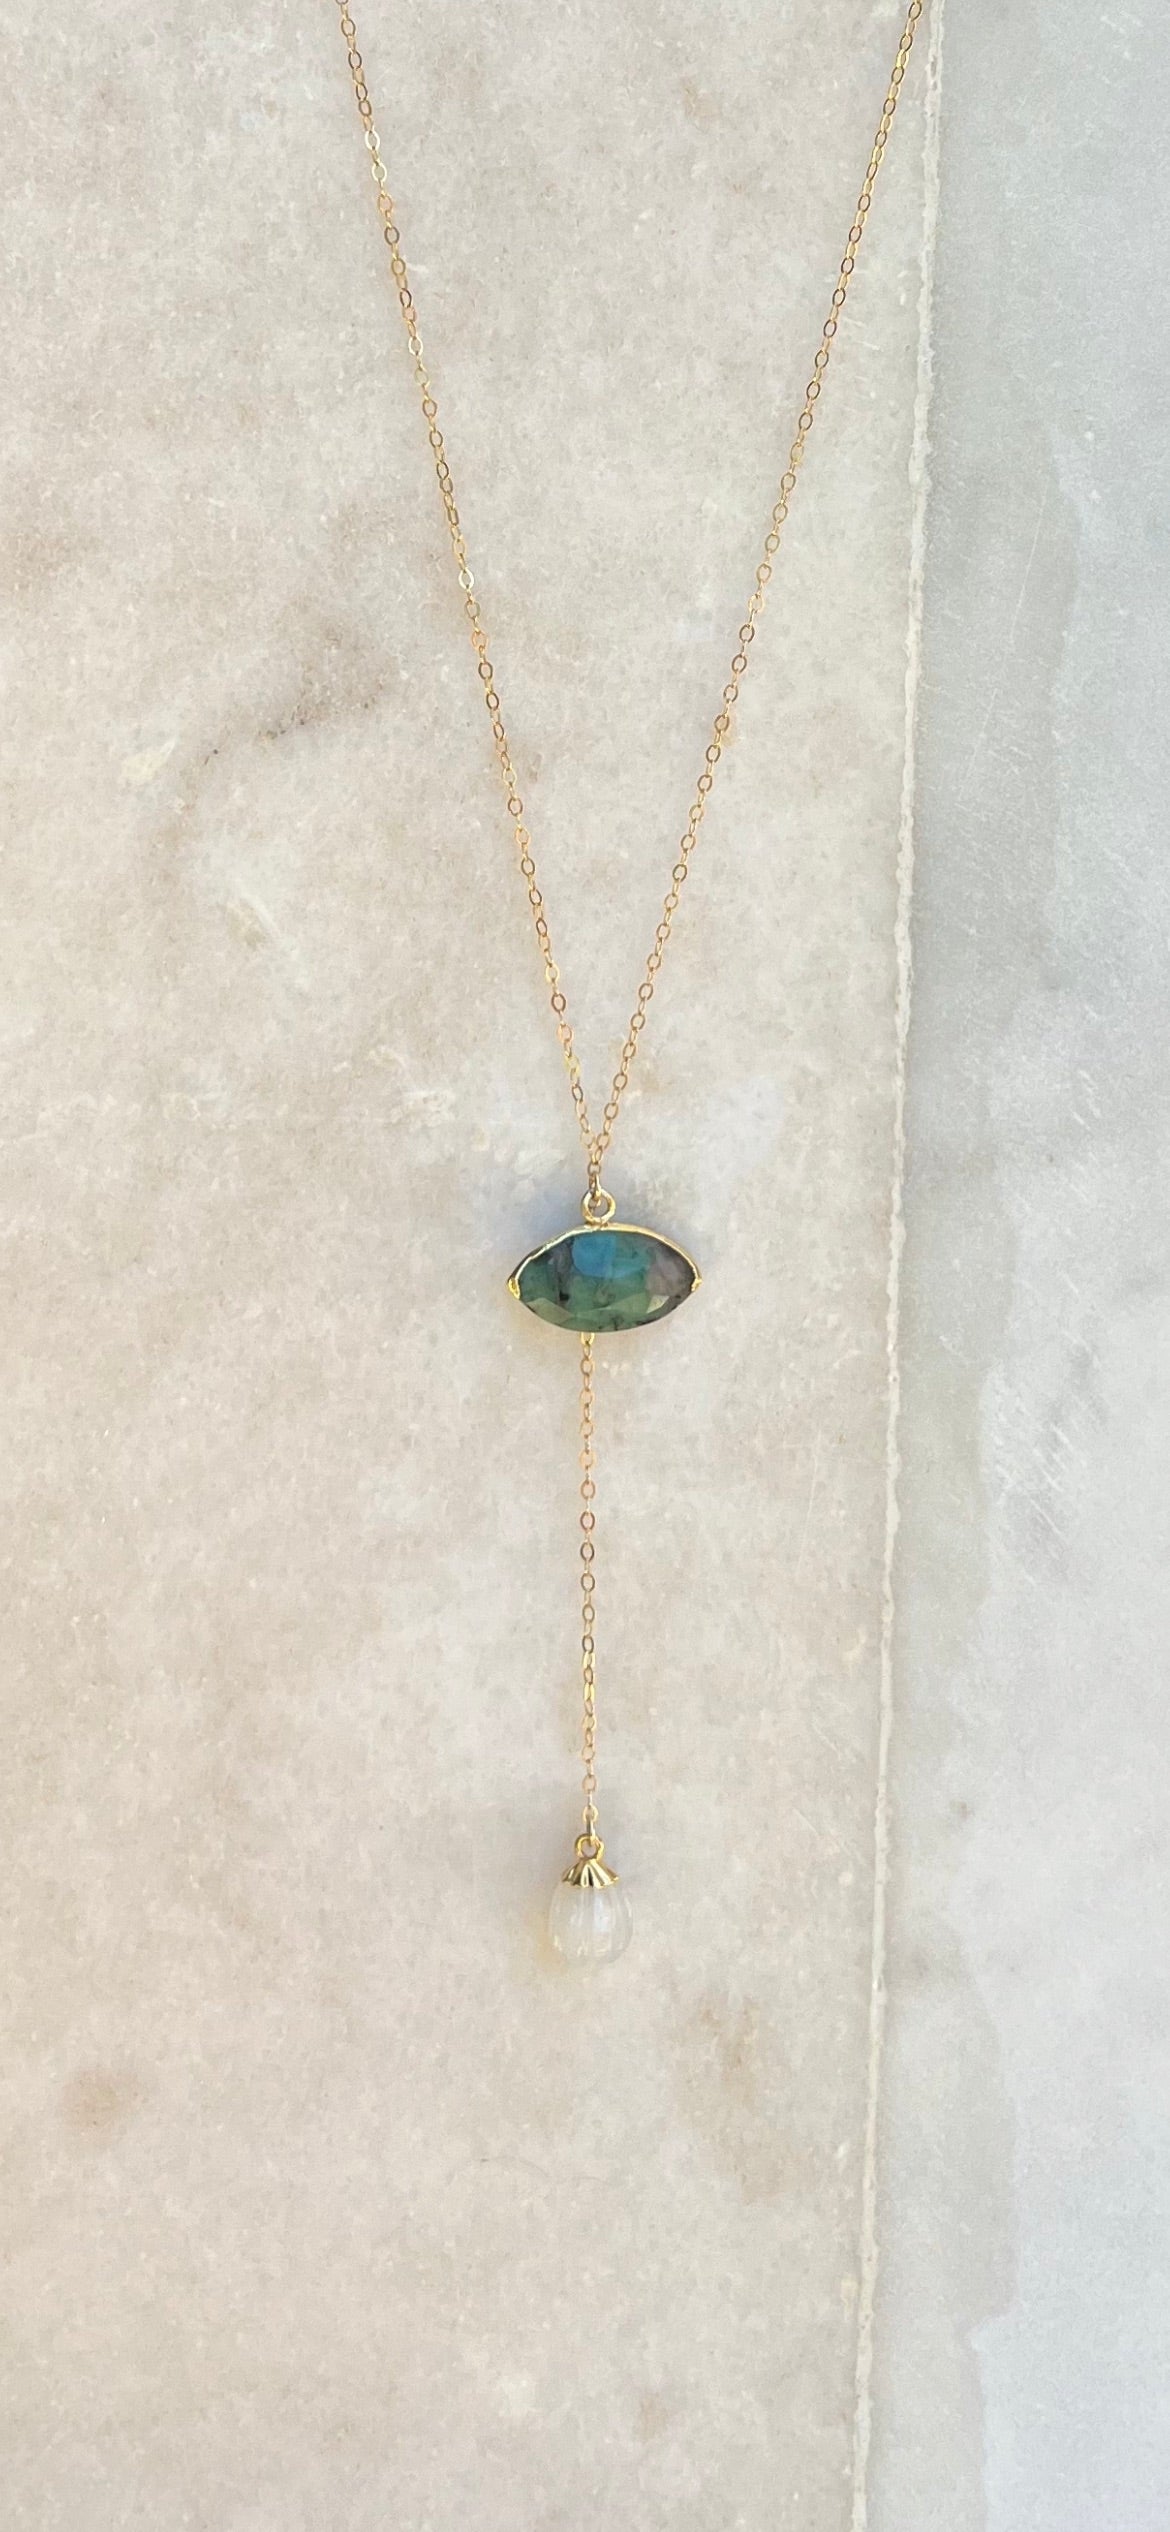 Emerald and Moonstone Lariat Necklace